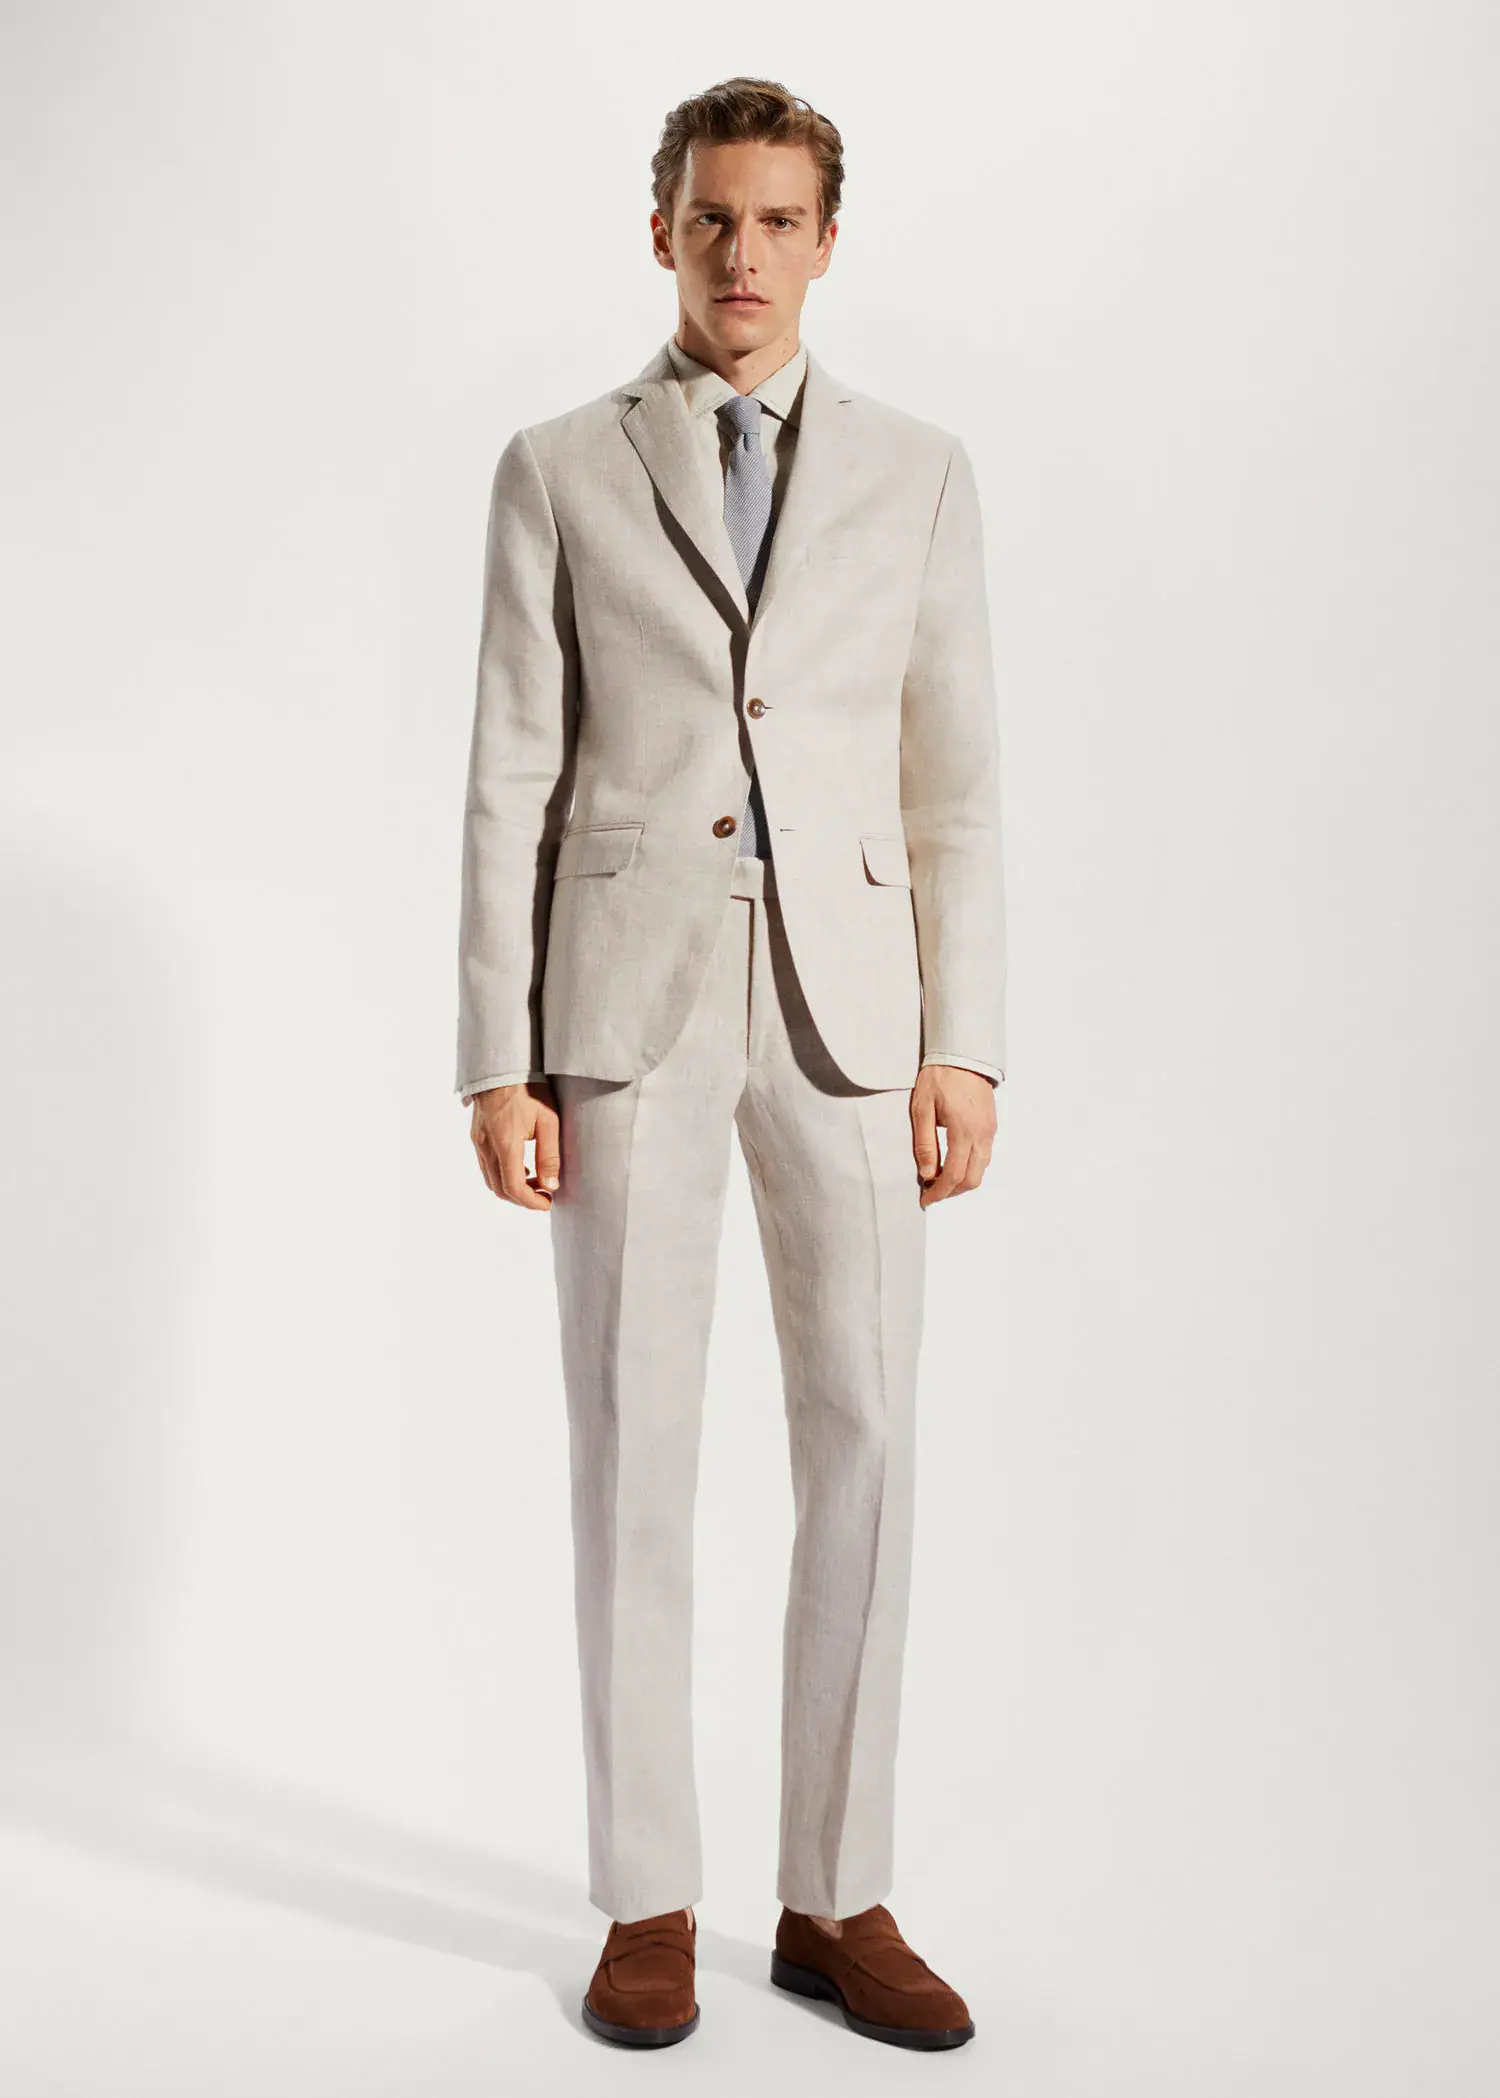 Mango Blazer suit 100% linen. a man wearing a suit and tie standing in front of a white wall. 